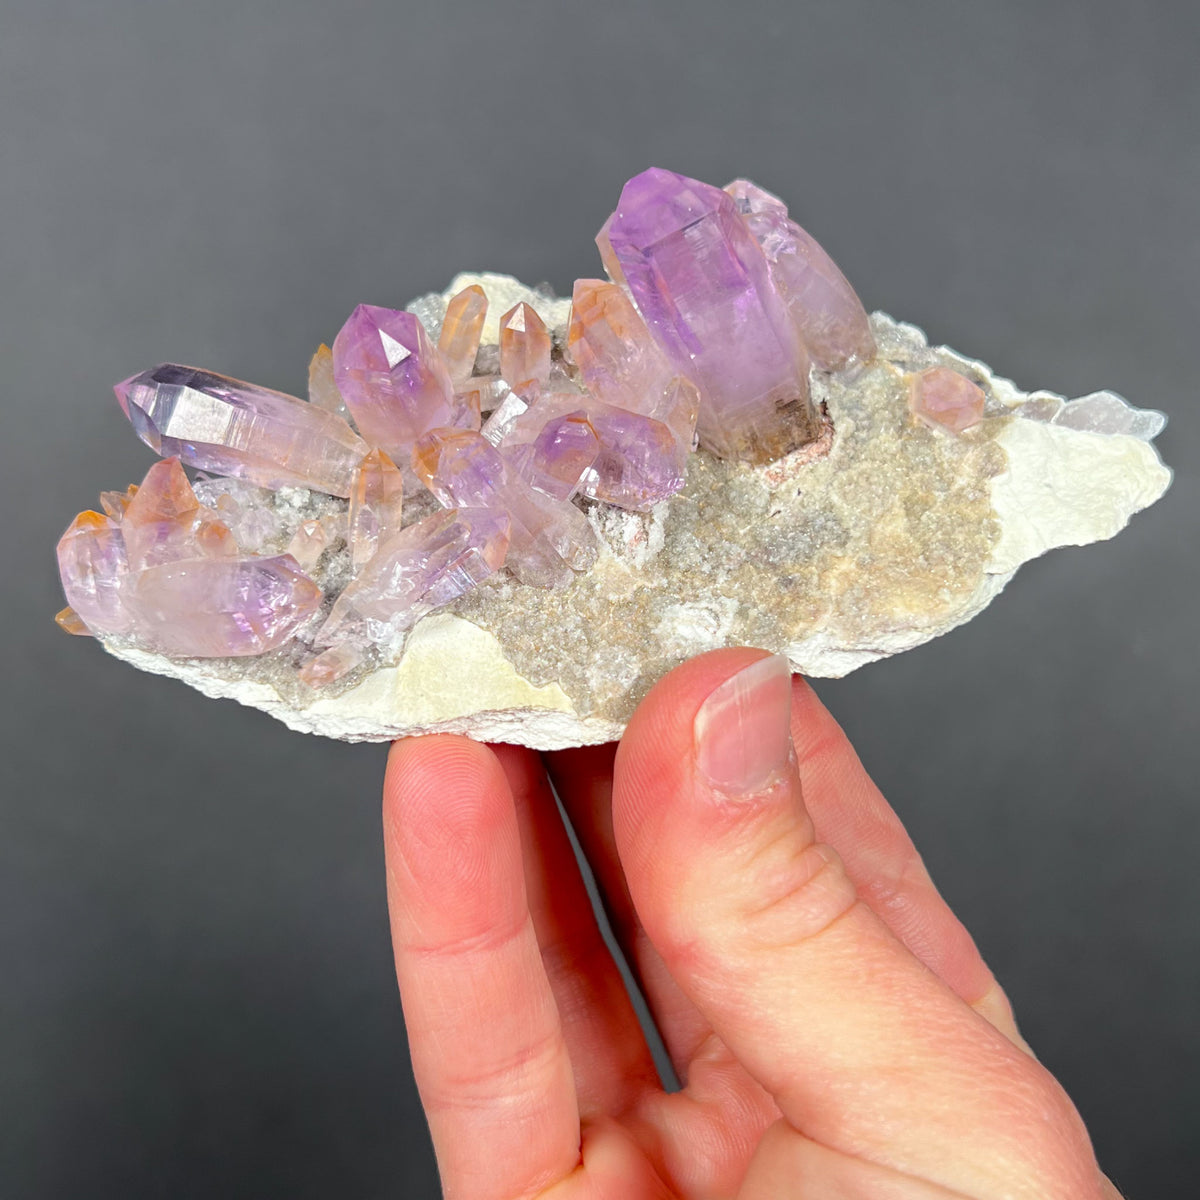 Amethyst with iron inclusions from Mexico